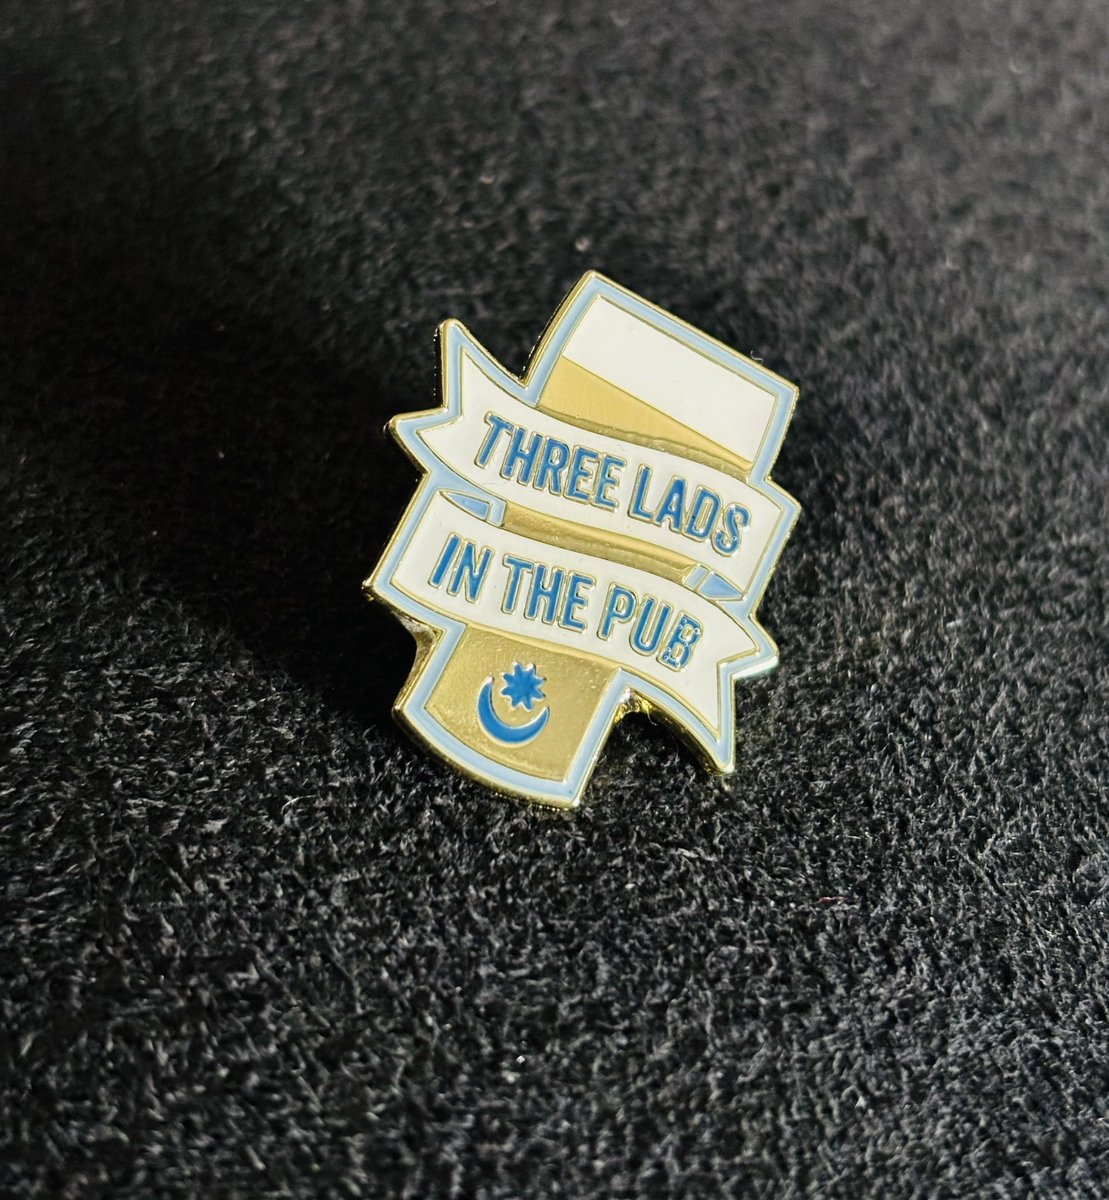 #pompey fans I’ve got about 15 @3LadsInThePub pin badges left and a few beer mats. I’ll have them with me today. Drop me a dm if you want one Champions edition 😉🏆